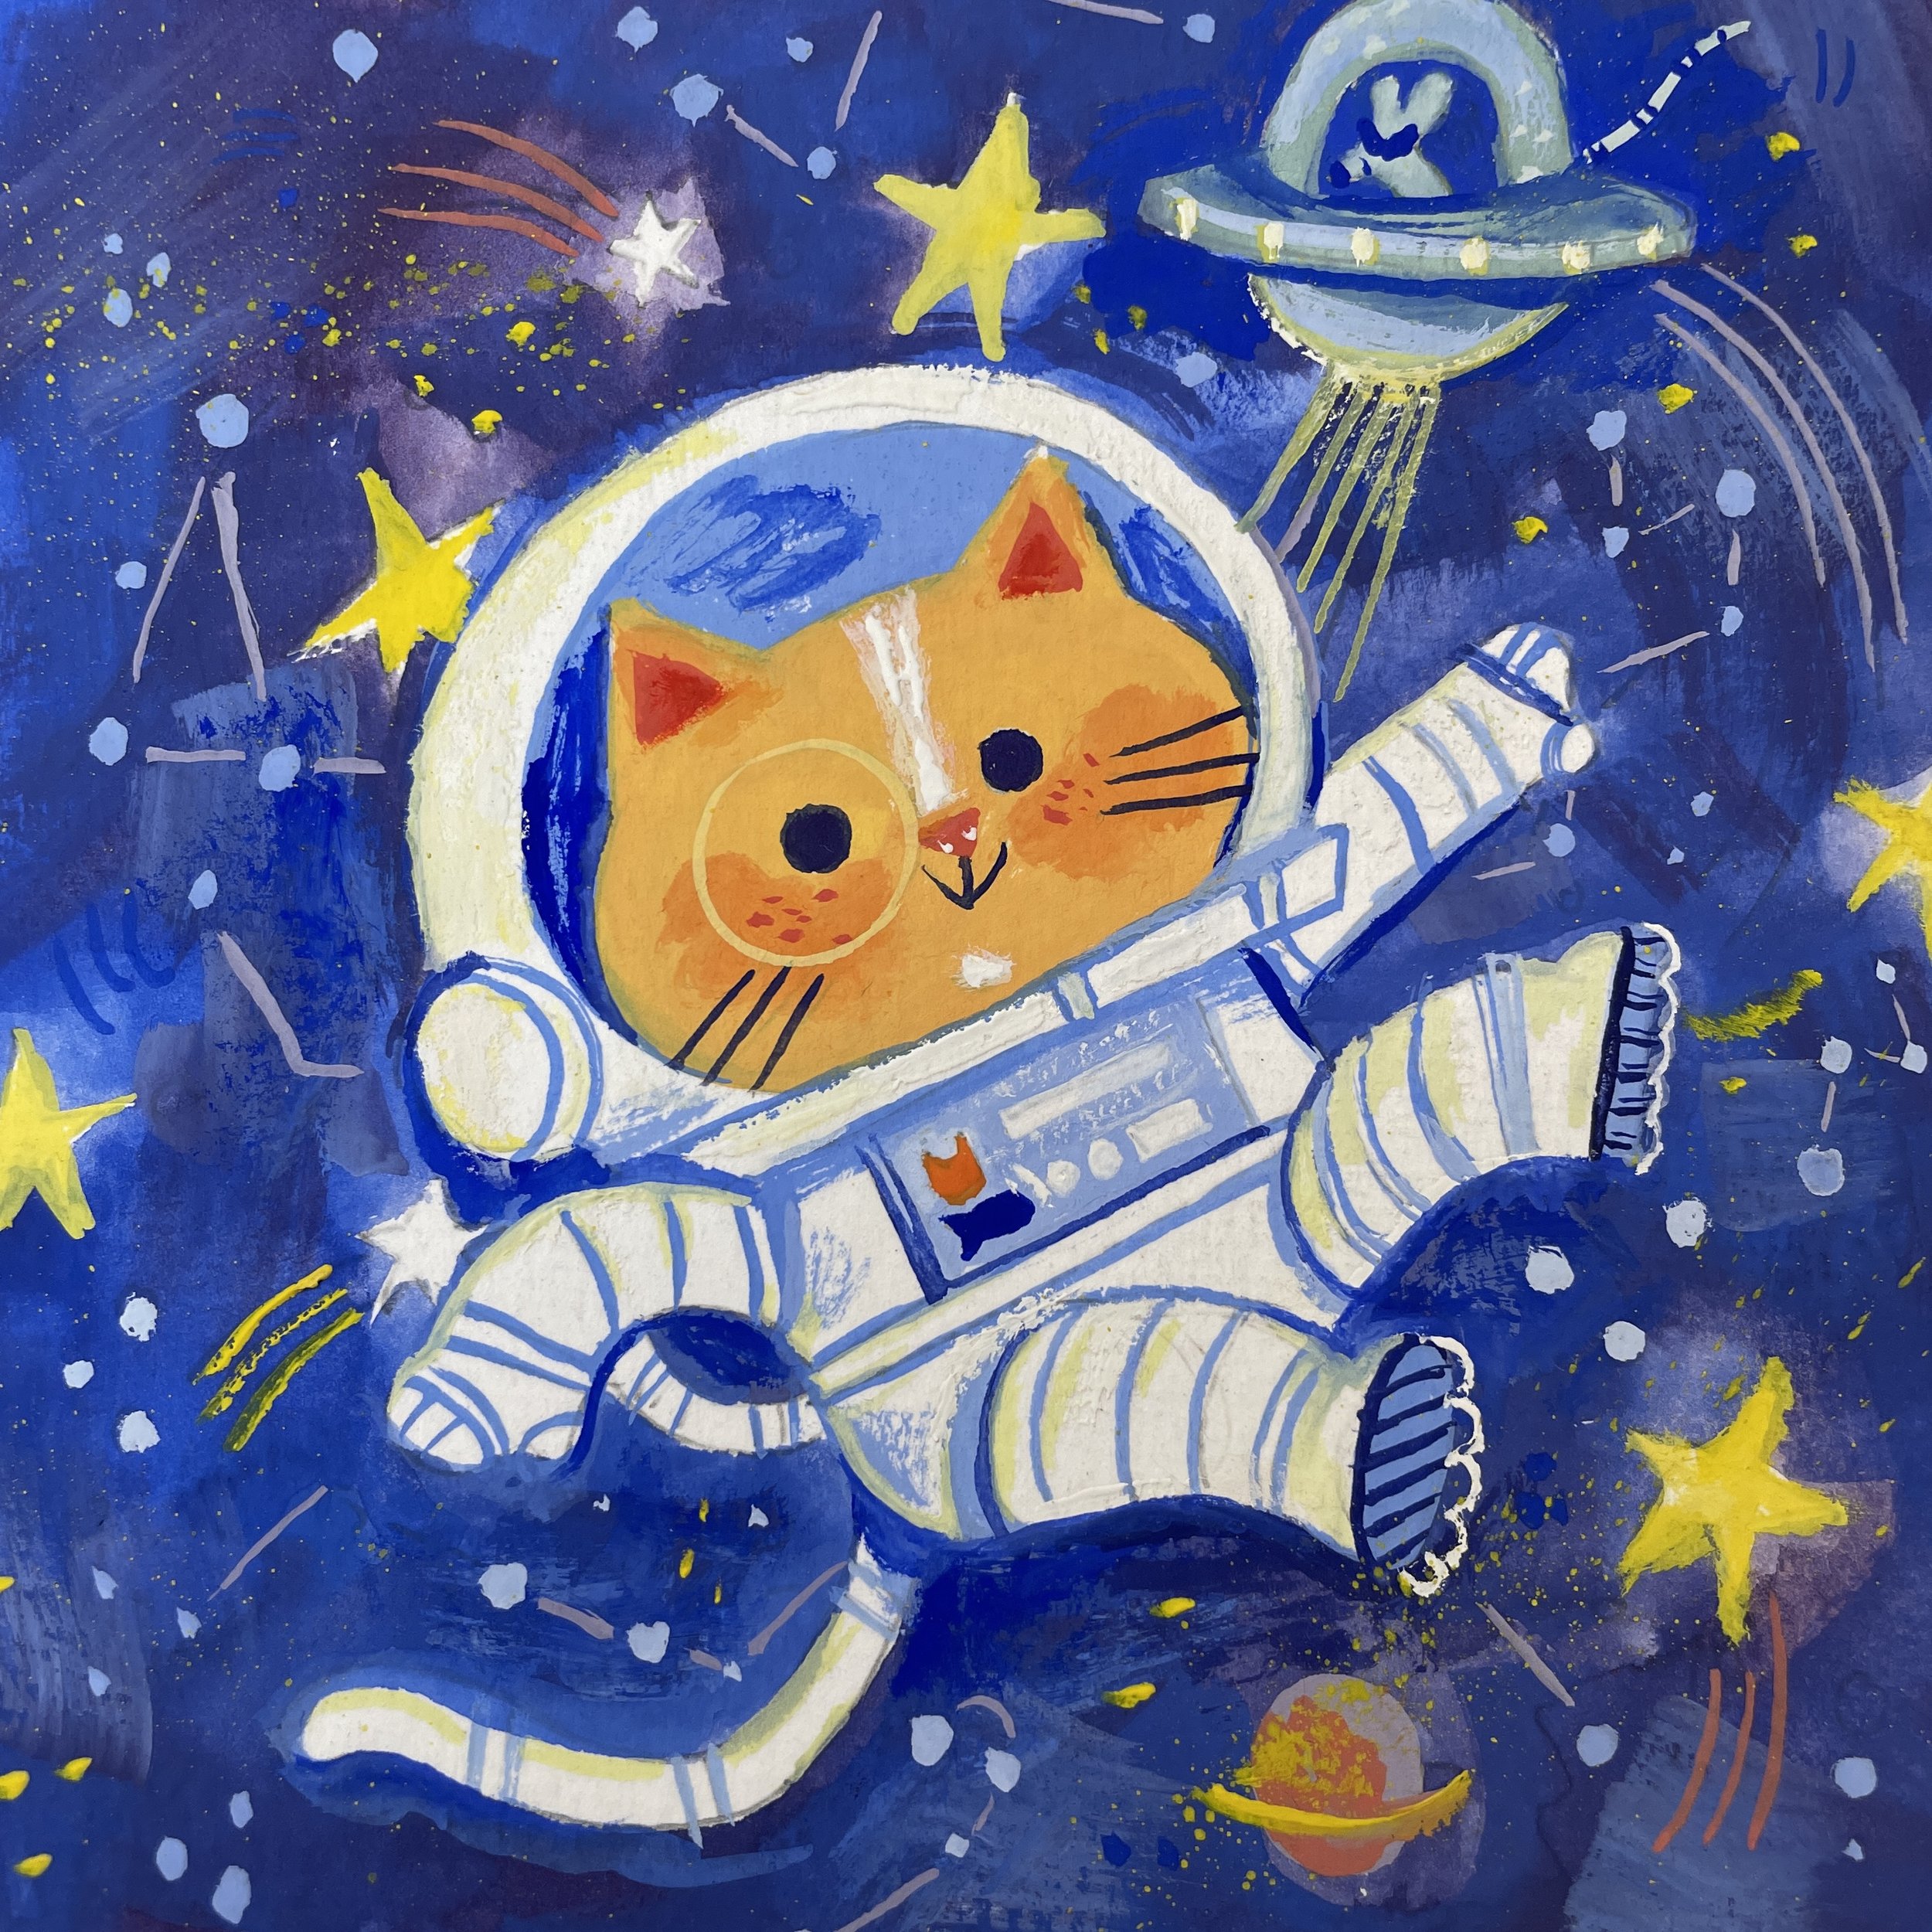 Sketchbook Journal: Large Outer Space Astronaut Rocket Themed